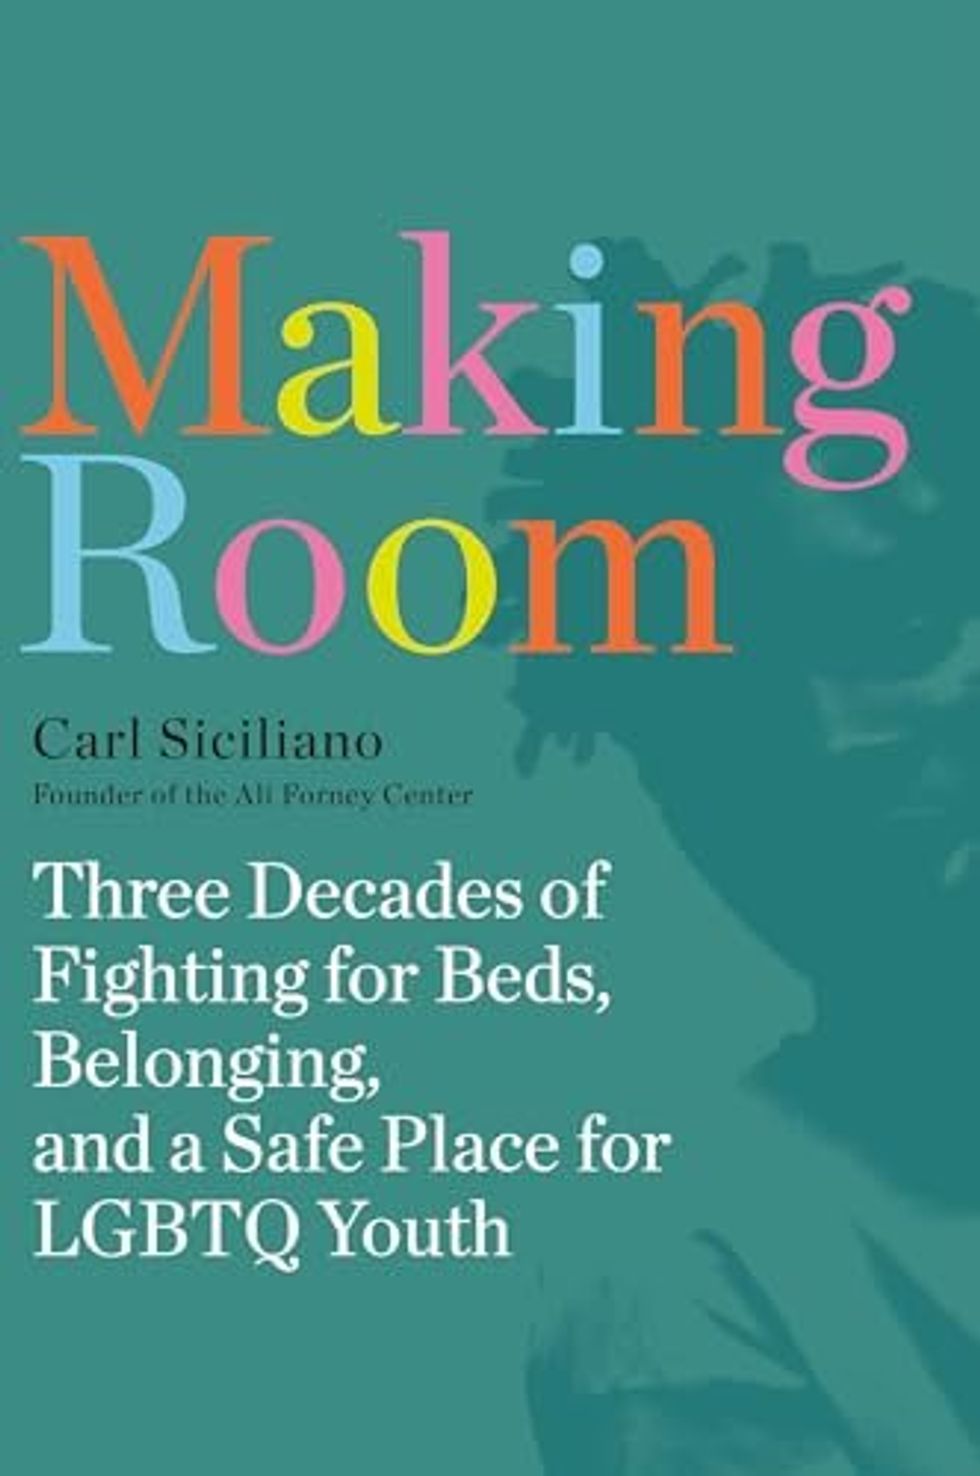 Making room: Three decades of fighting for beds, belonging and a safe place for LGBTQ youth